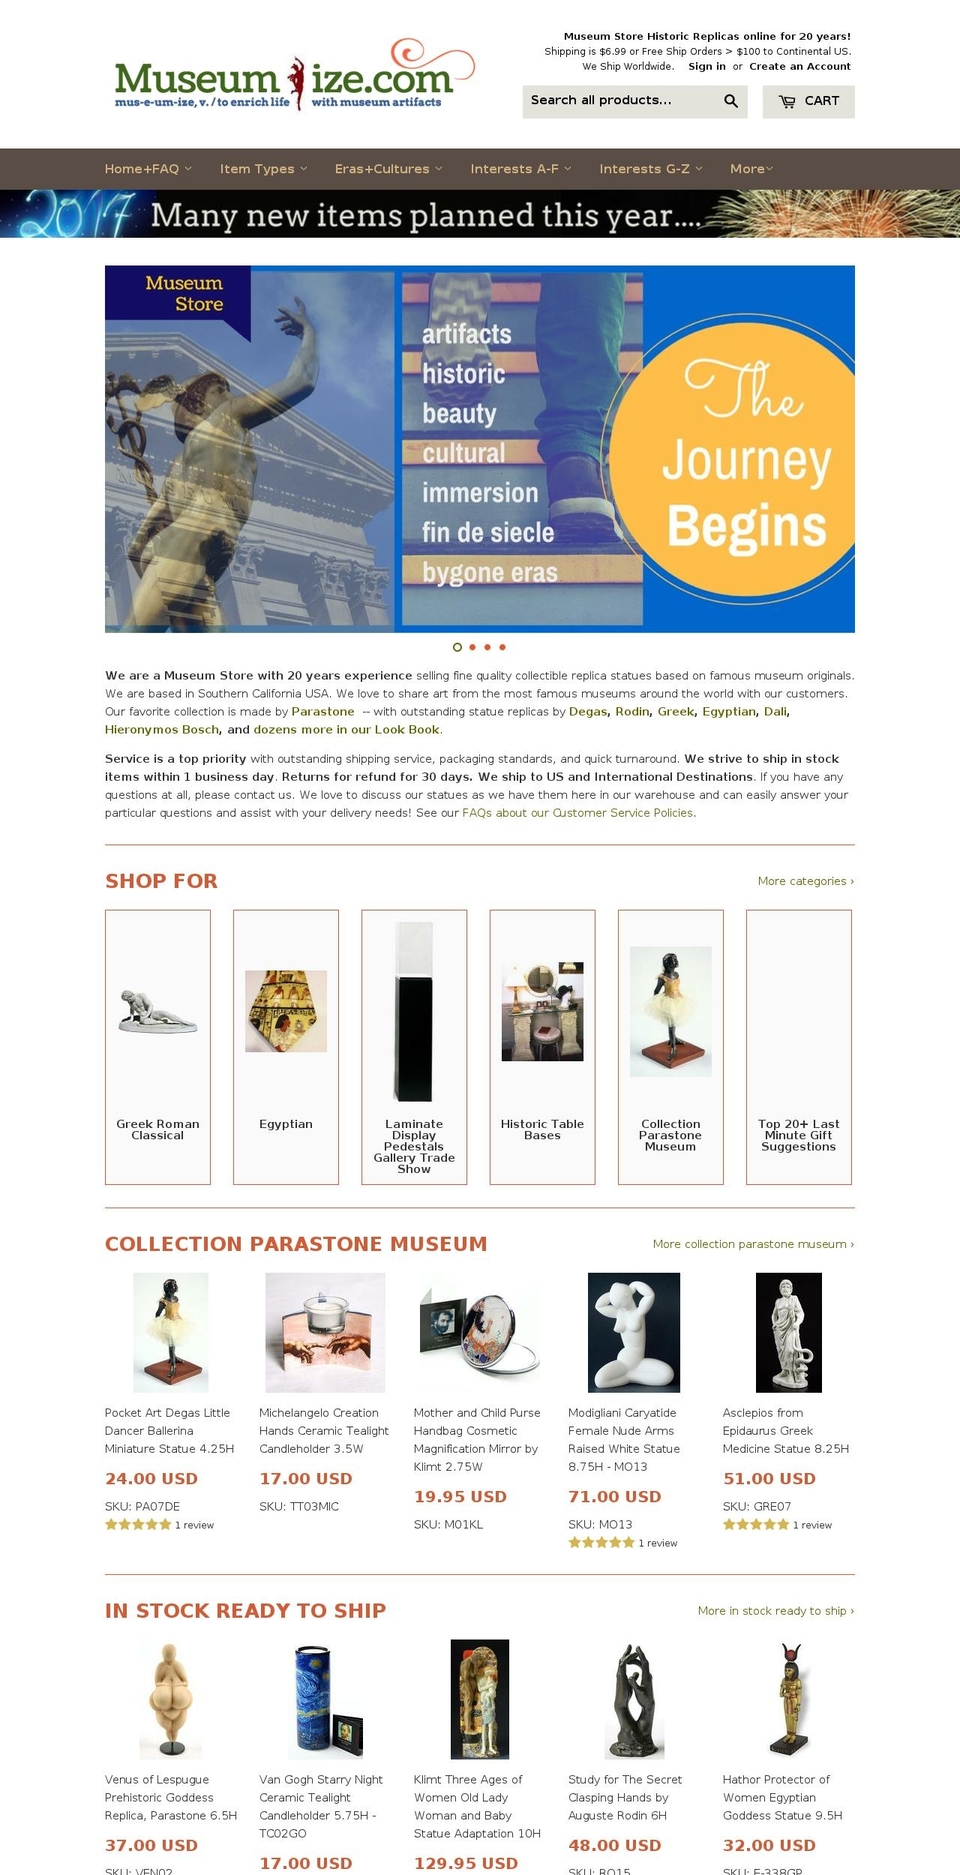 Supply Shopify theme site example museumize.com